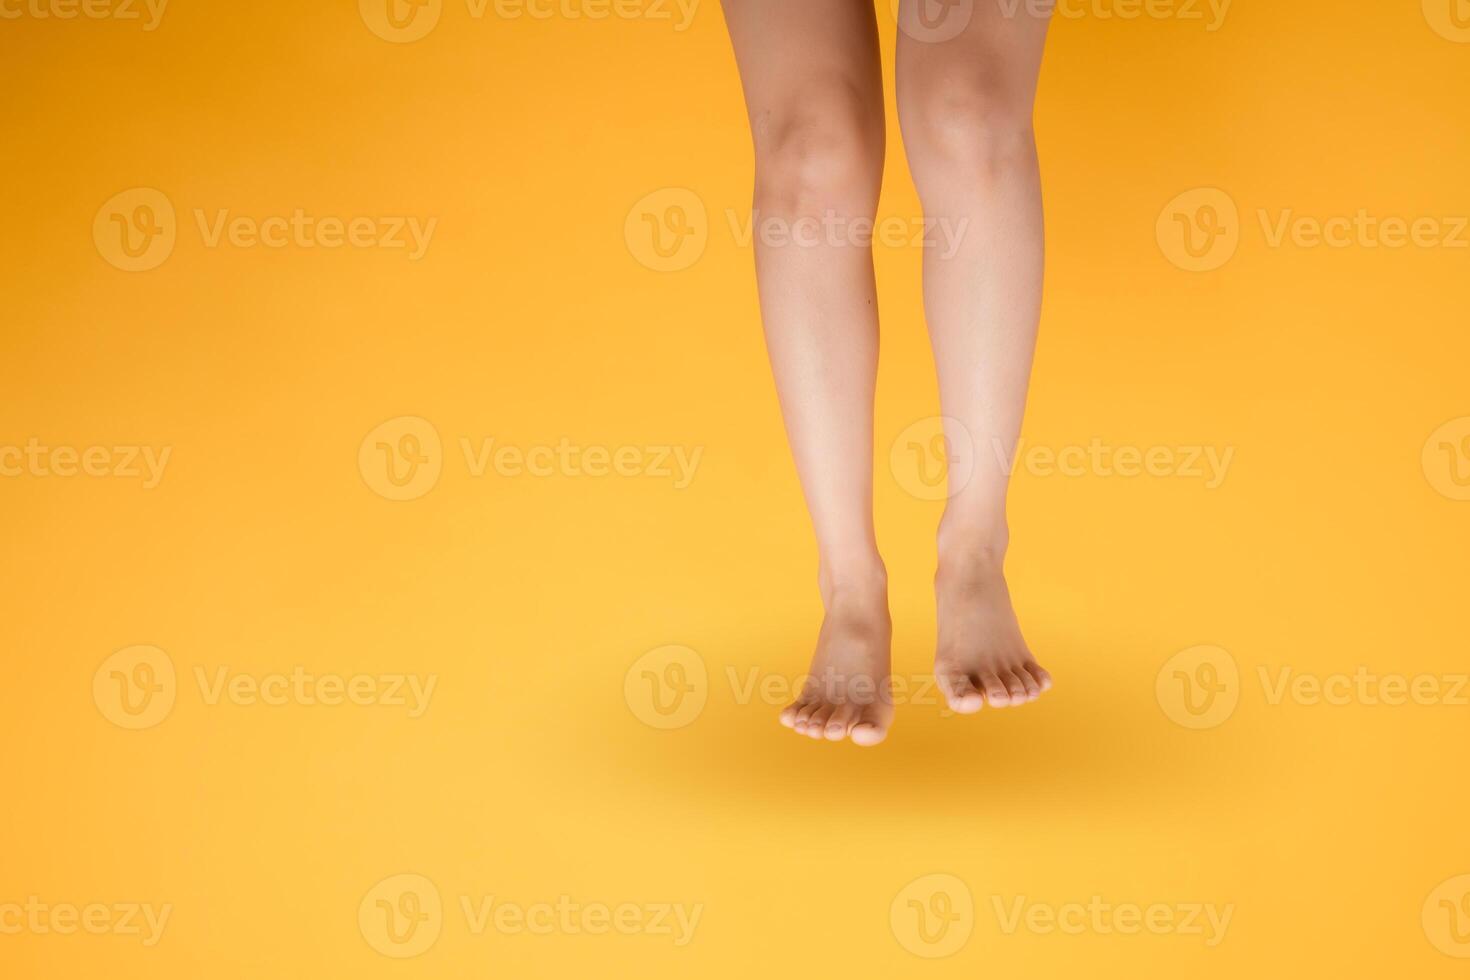 Indulge in the luxurious sensation of velvety foot touch with a 30s person's elegant close up on vibrant yellow backdrop. photo